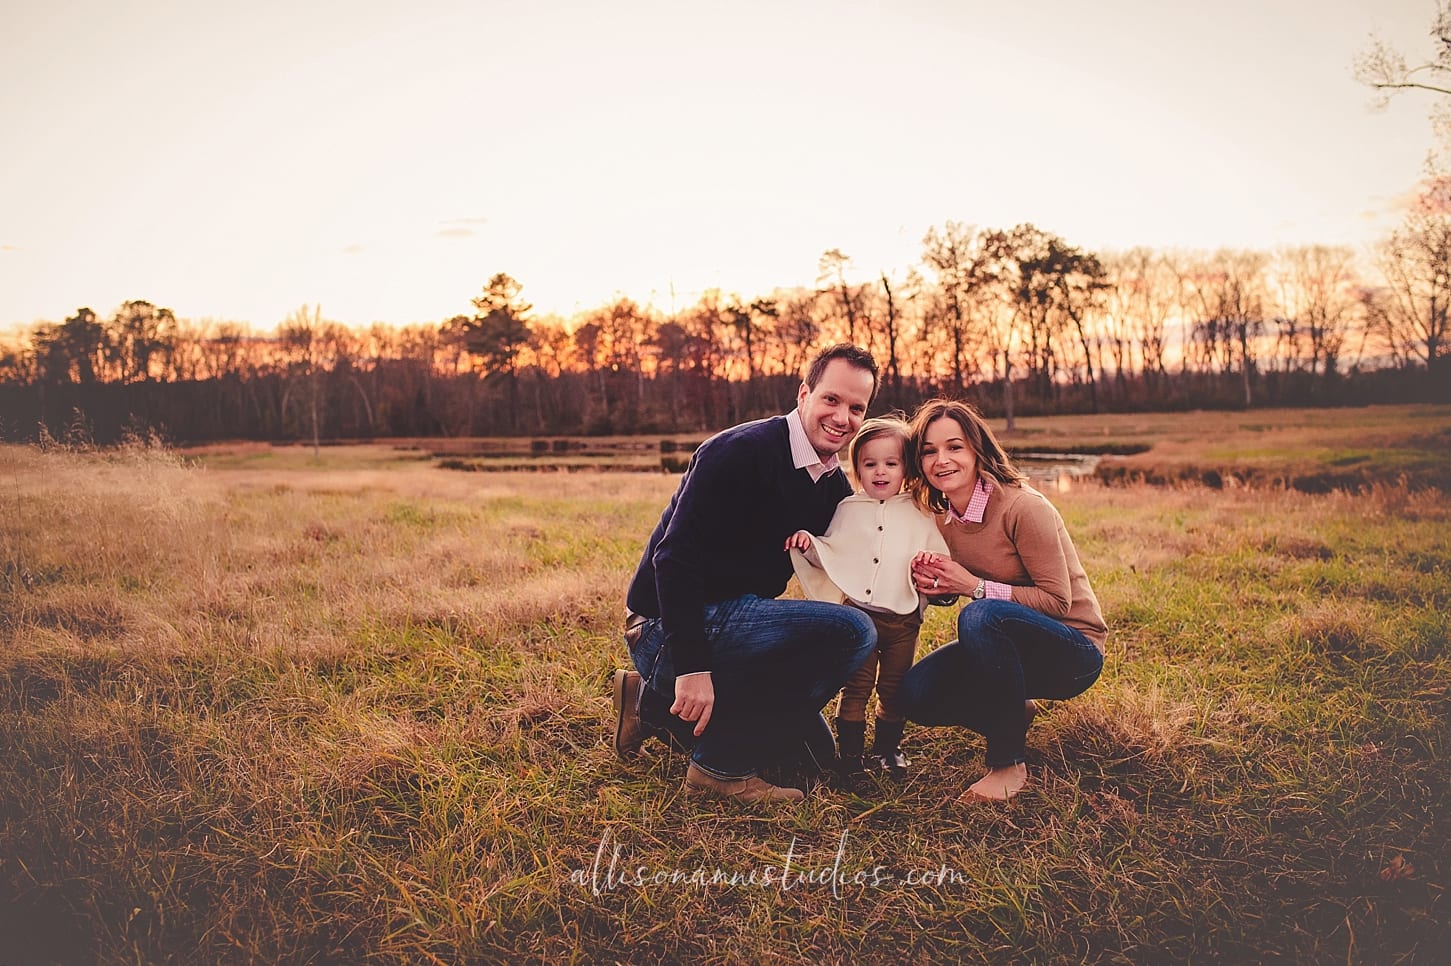 Google, customer for life, Best family photographer in South Jersey, AllisonAnne Studios, Allison Gallagher, Hammonton, thank you notes are important, self reflection, love, november sunset